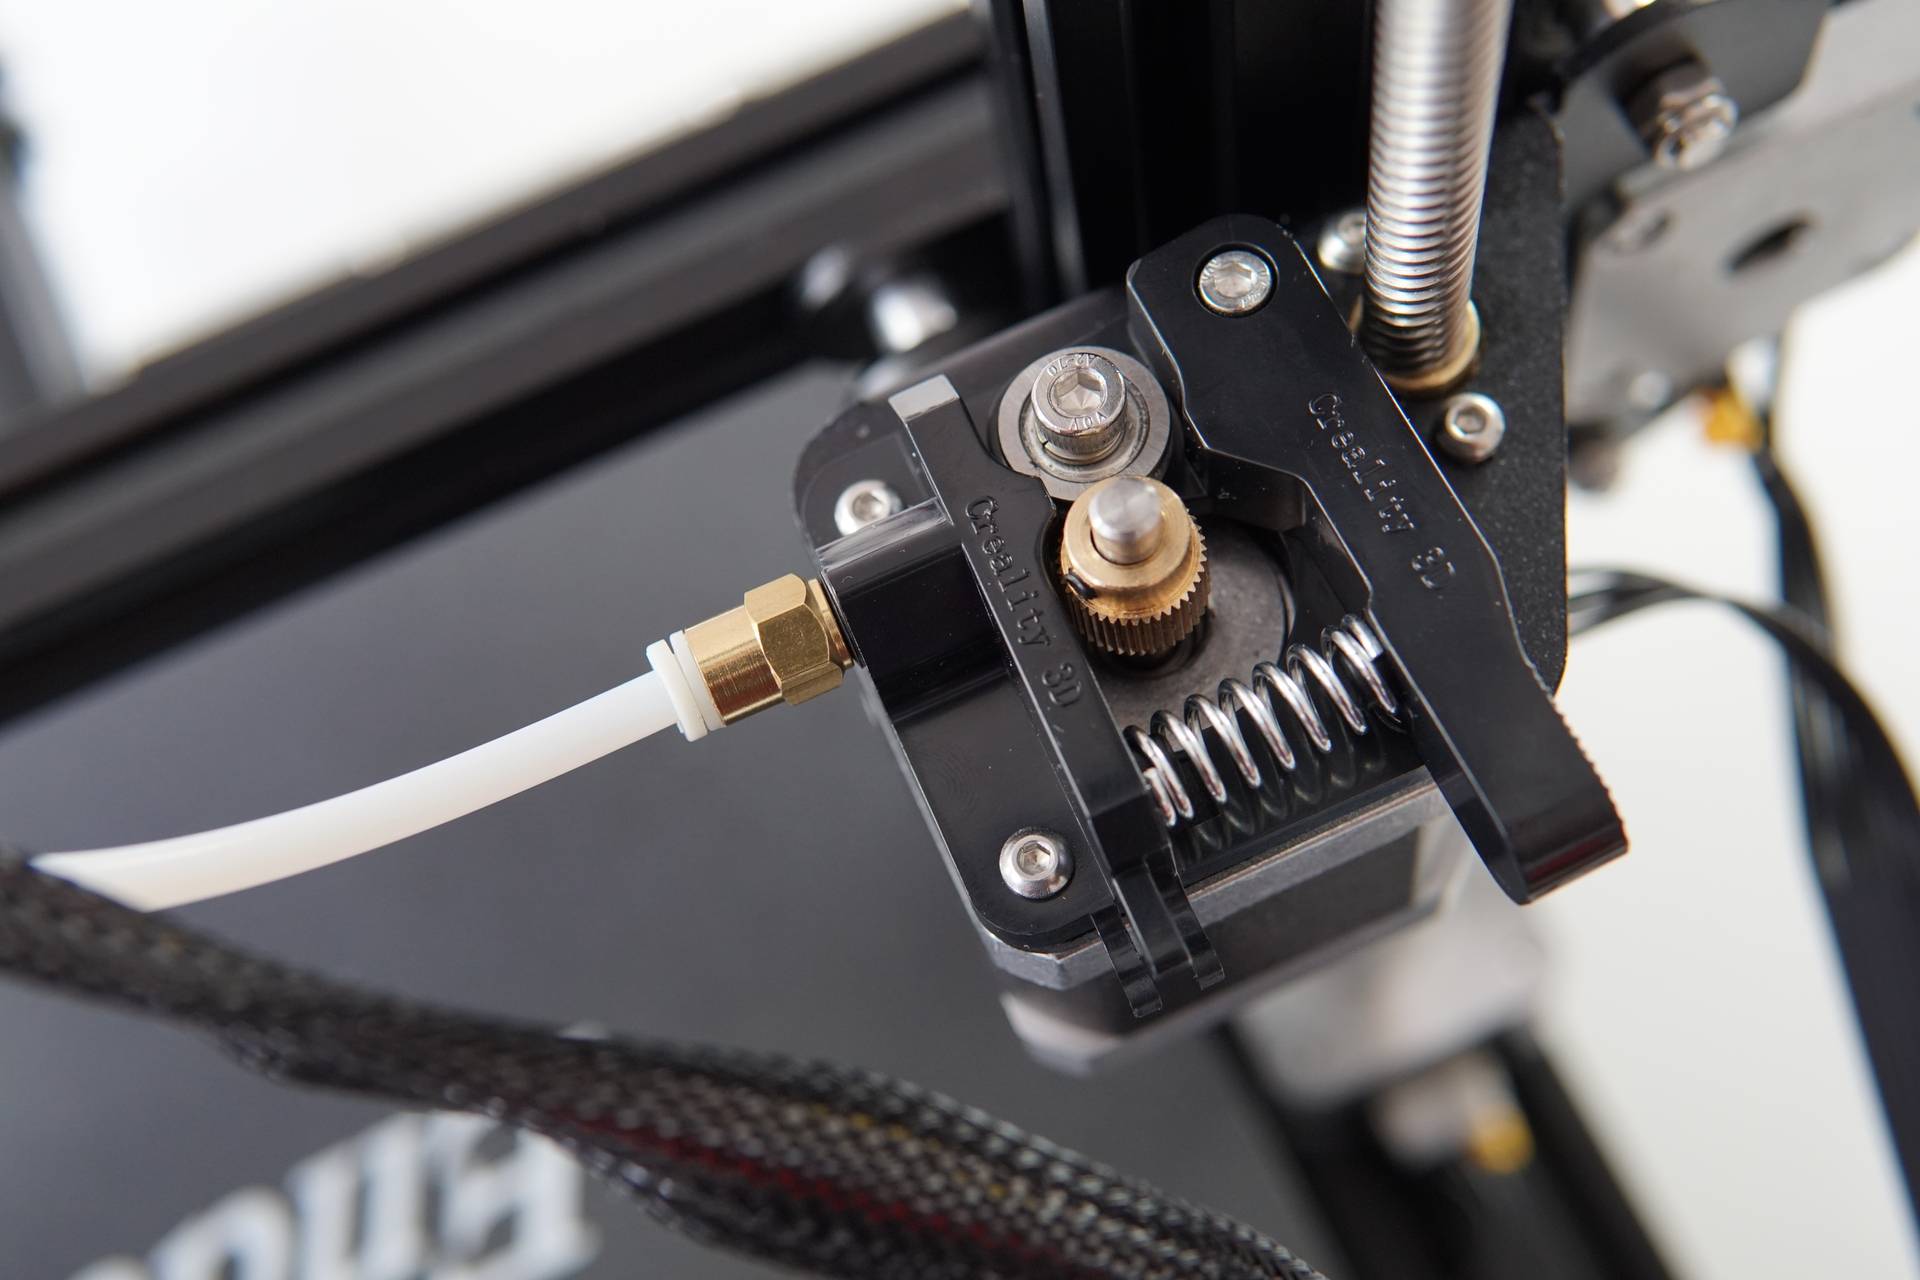 Ender 3 (V2/Pro) Extruder Skipping: 7 Tips to Fix It All3DP